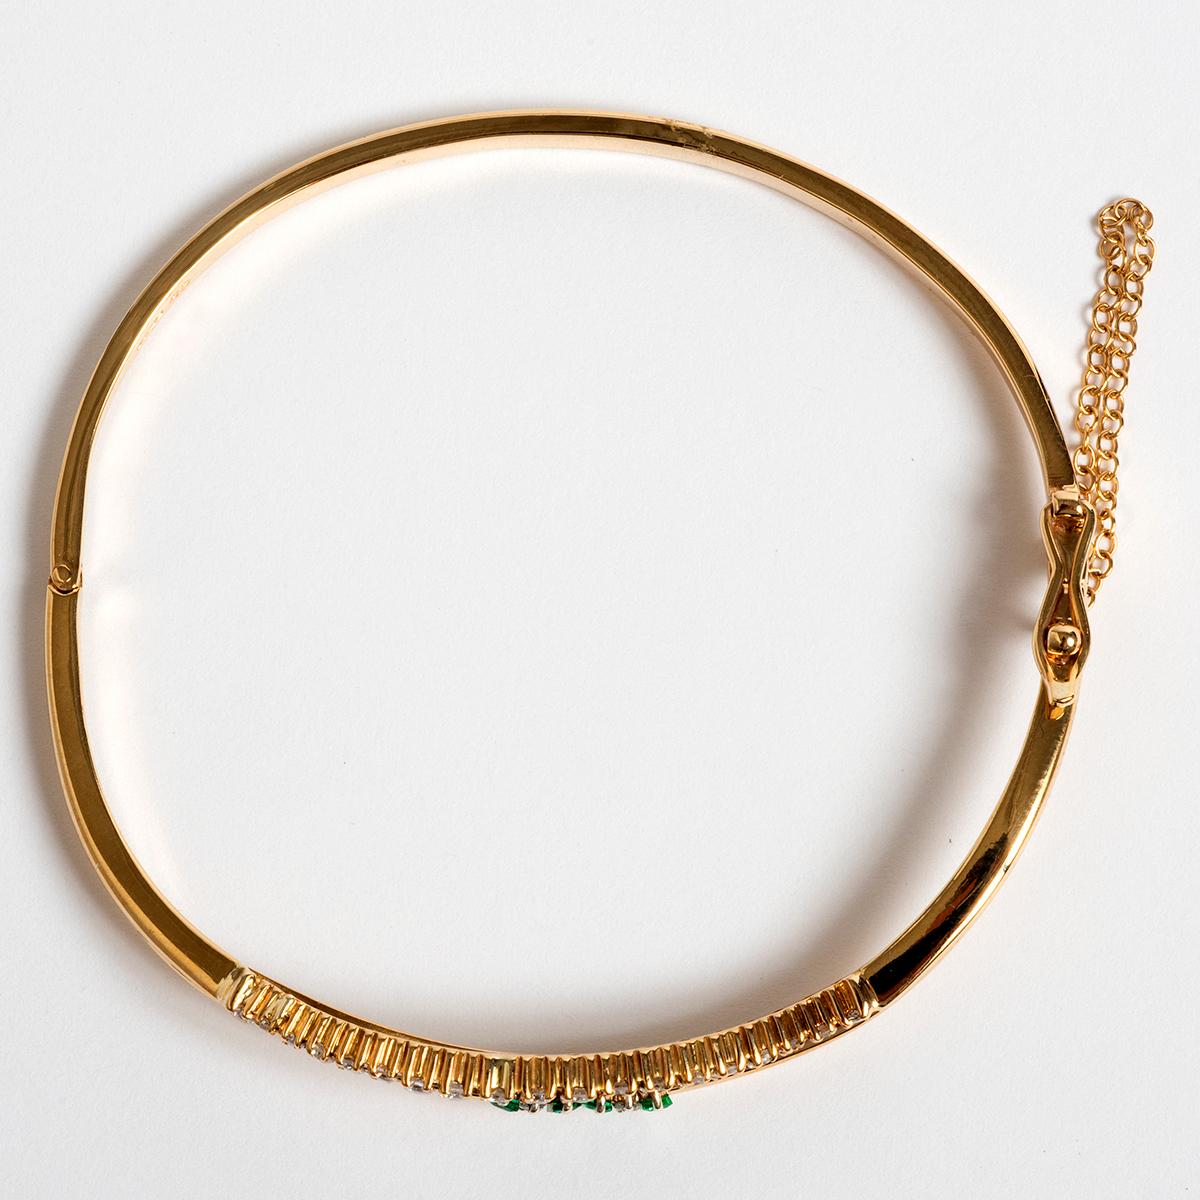 A unique piece within our carefully curated Vintage & Prestige fine jewellery collection, we are delighted to present the following: This pretty diamond and emerald bangle is set within 9 carat yellow gold. This bangle measures 60 mm x 55mm and